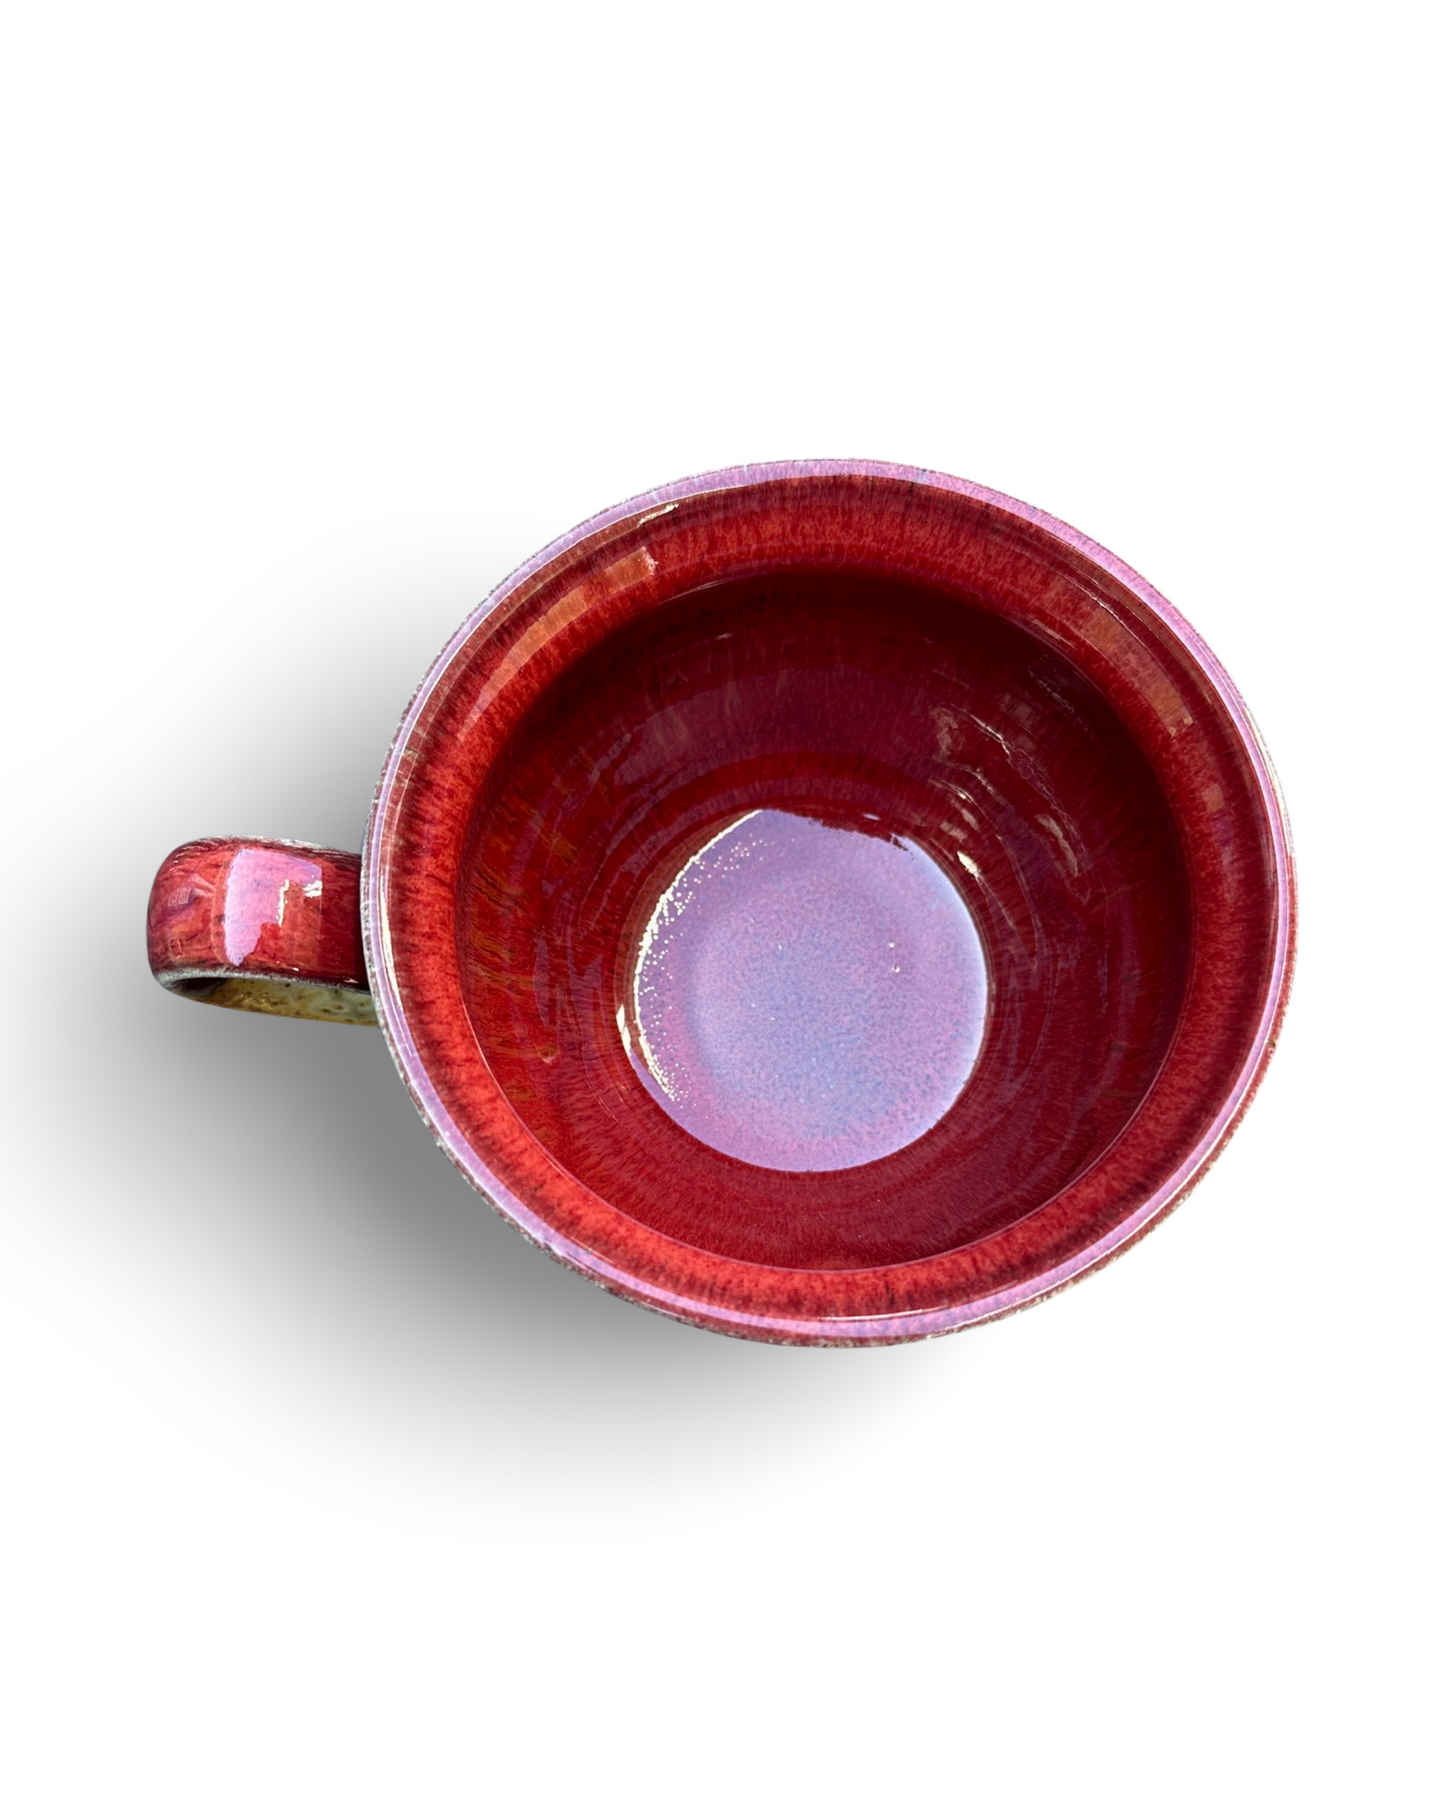 Soup Mug with Handle by Ray Pottery